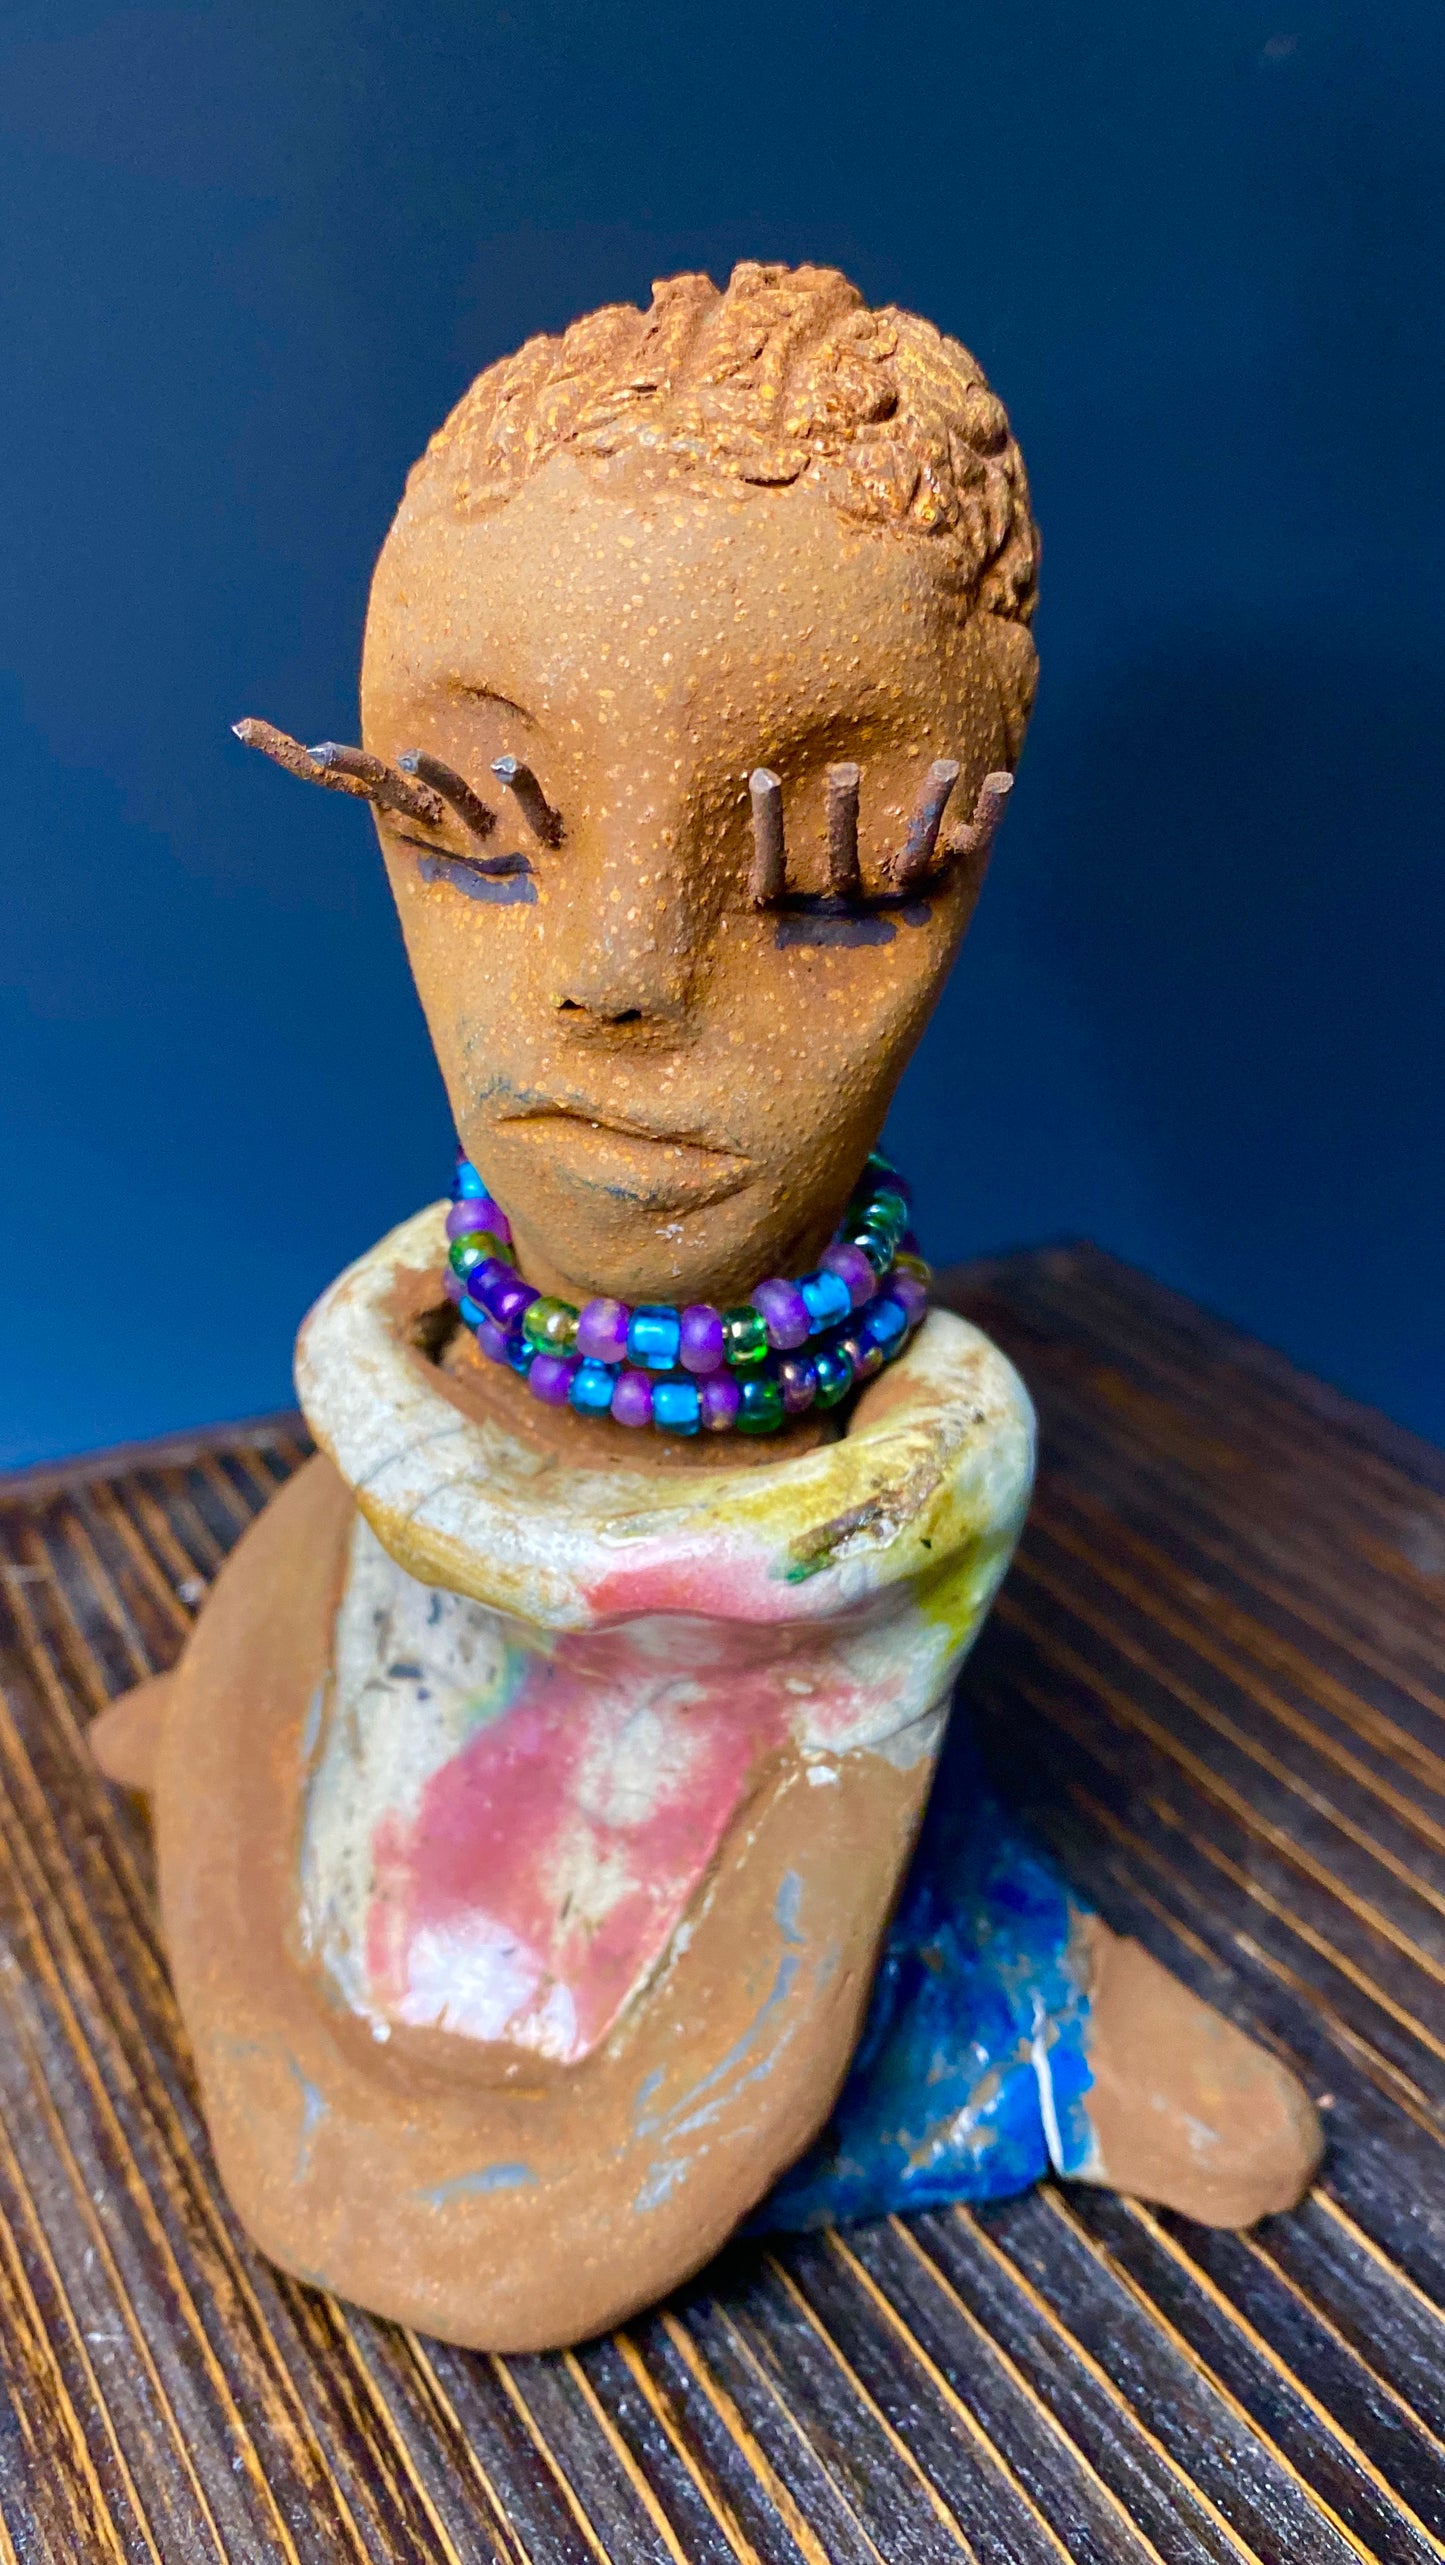 Meet Little Riley! Riley stands 5" x 5”x 3" and weighs  11 ozs.  Riley has a lovely multicolored glossy dress with a matching beaded necklace.  She has long lashes!  Riley appears to sit in a yoga pose. Her long arms rest at her side. Riley is a great starter piece from the Herdew Collection!